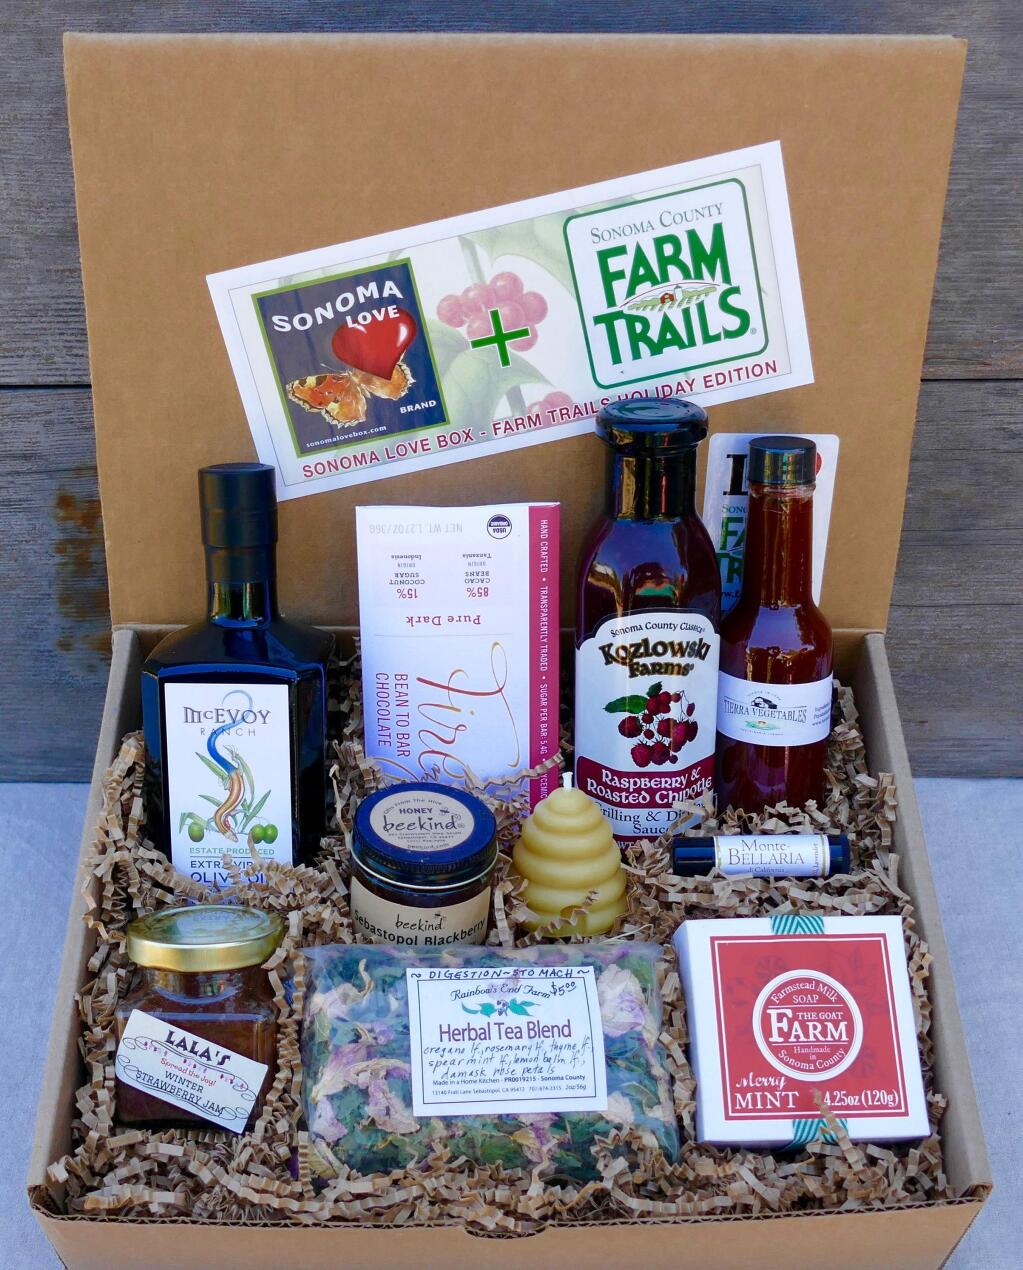 This is the Farm Trails Edition of the Sonoma Love Gift Box, which has produce from local farmers.